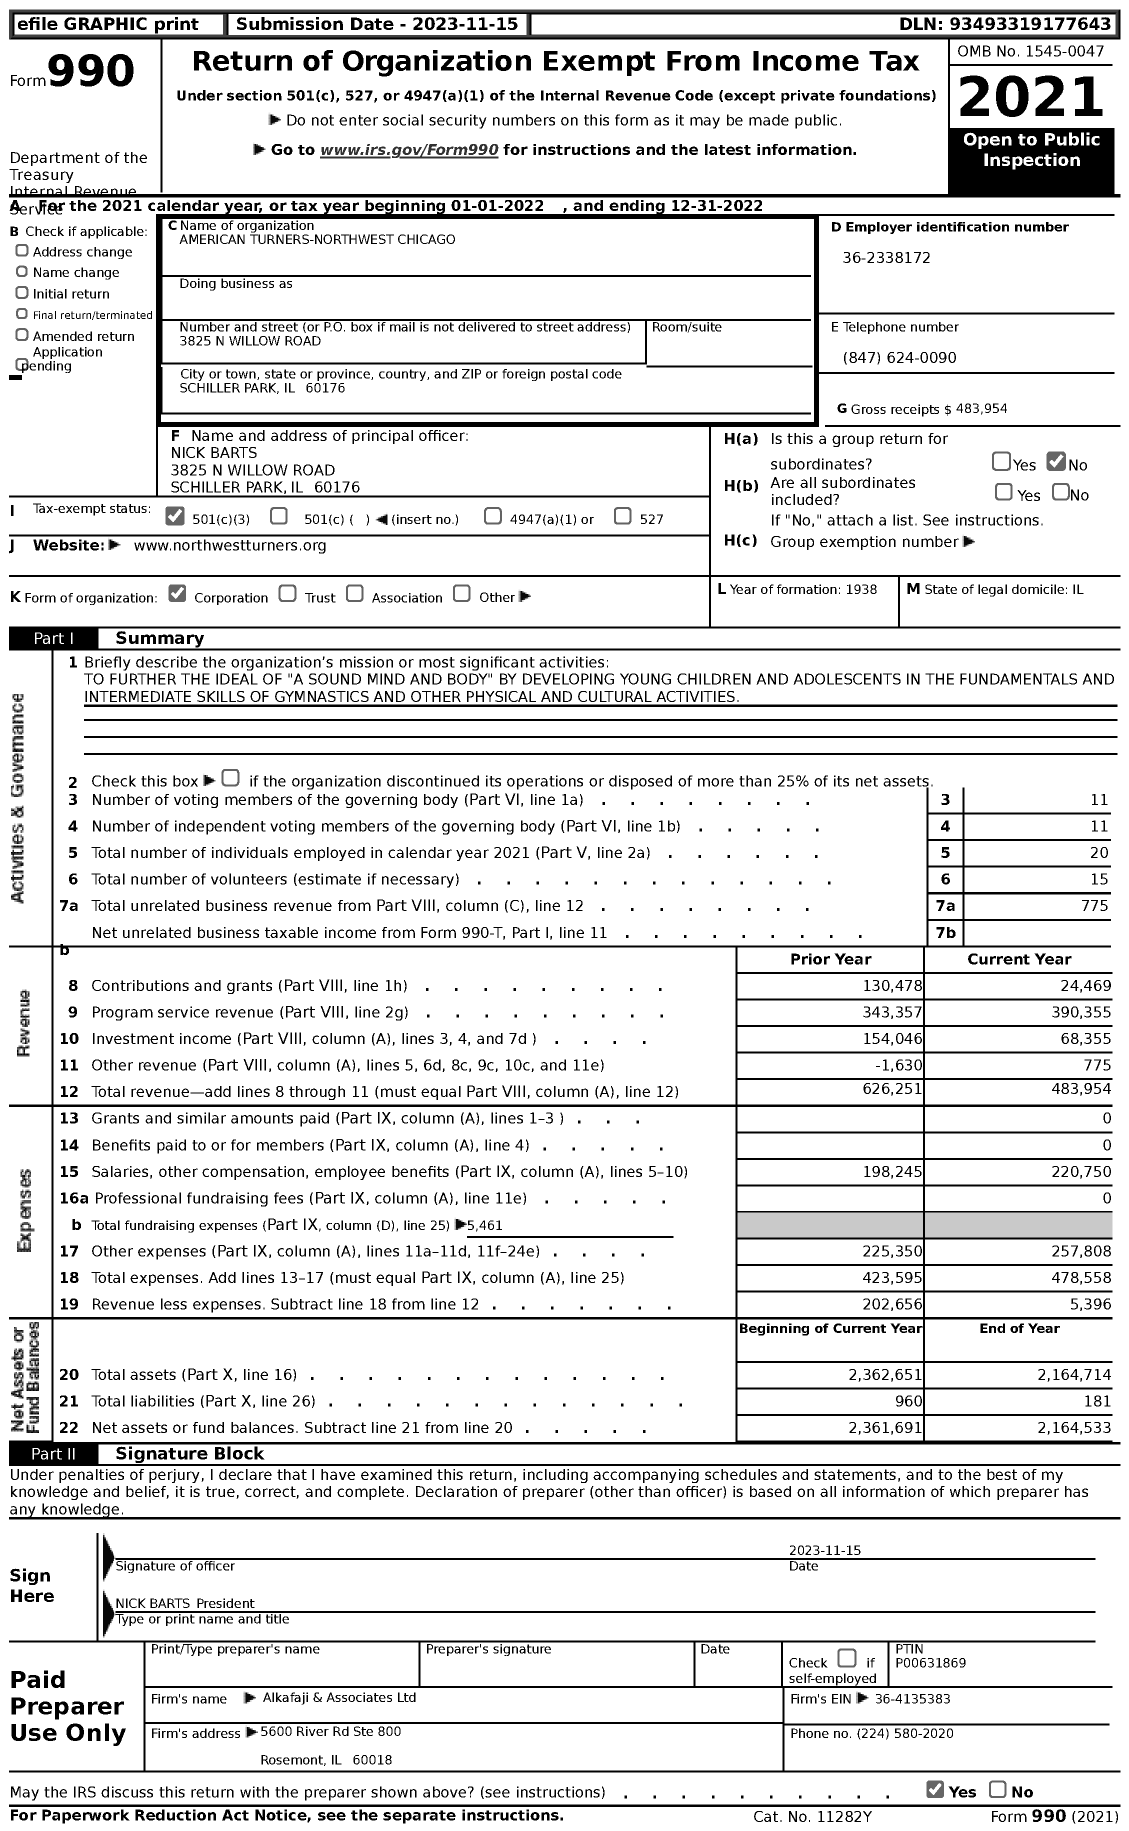 Image of first page of 2022 Form 990 for American Turners-Northwest Chicago